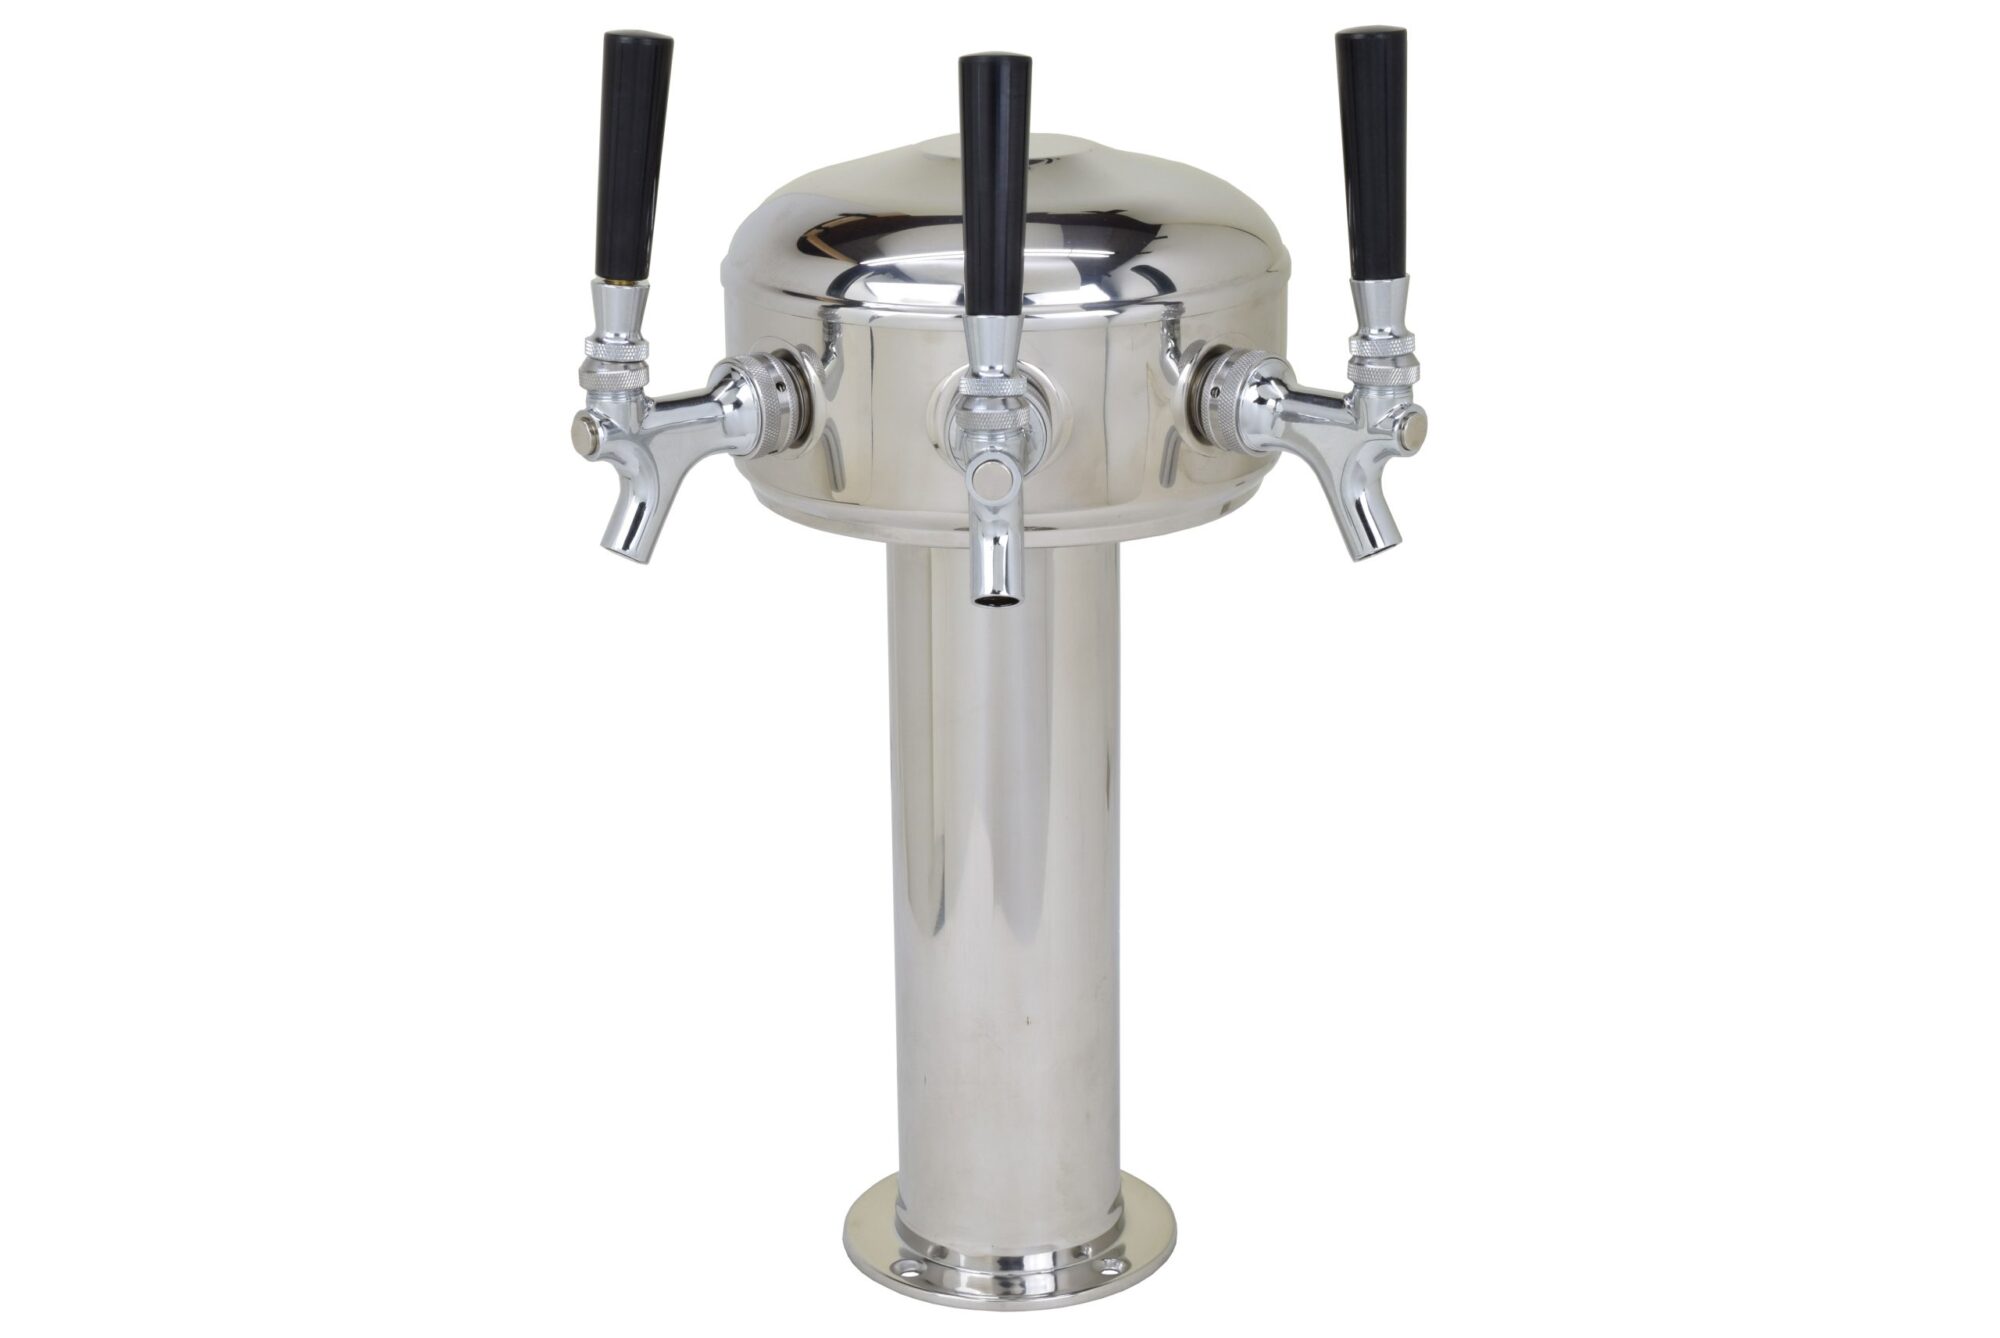 626CG-3front Three Faucet Mini Mushroom Tower with Chrome Plated Faucets and Shanks - Glycol Ready